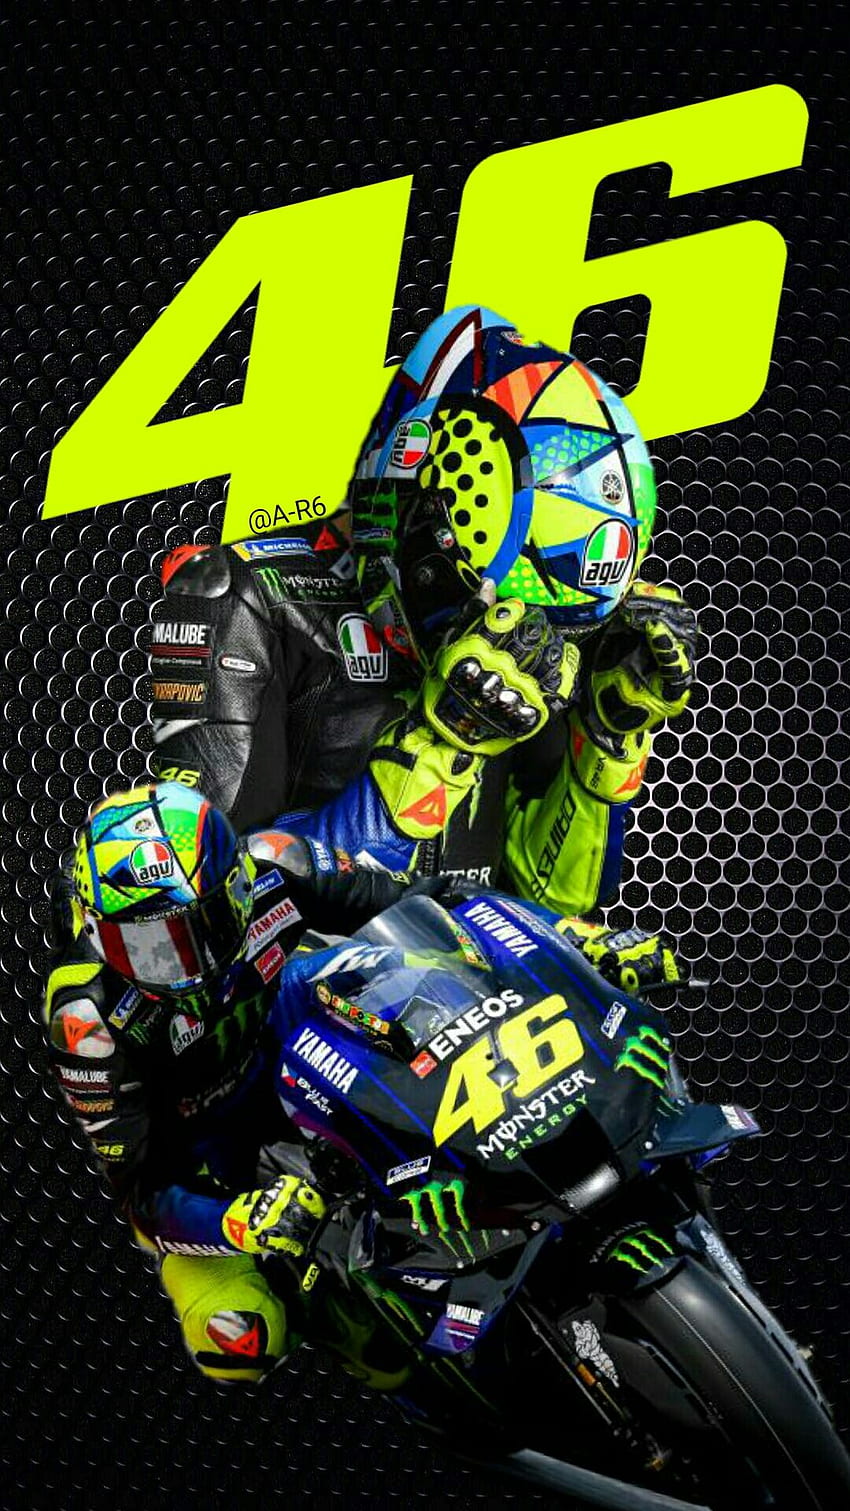 Valentino Rossi 46 Wallpaper Download | MobCup